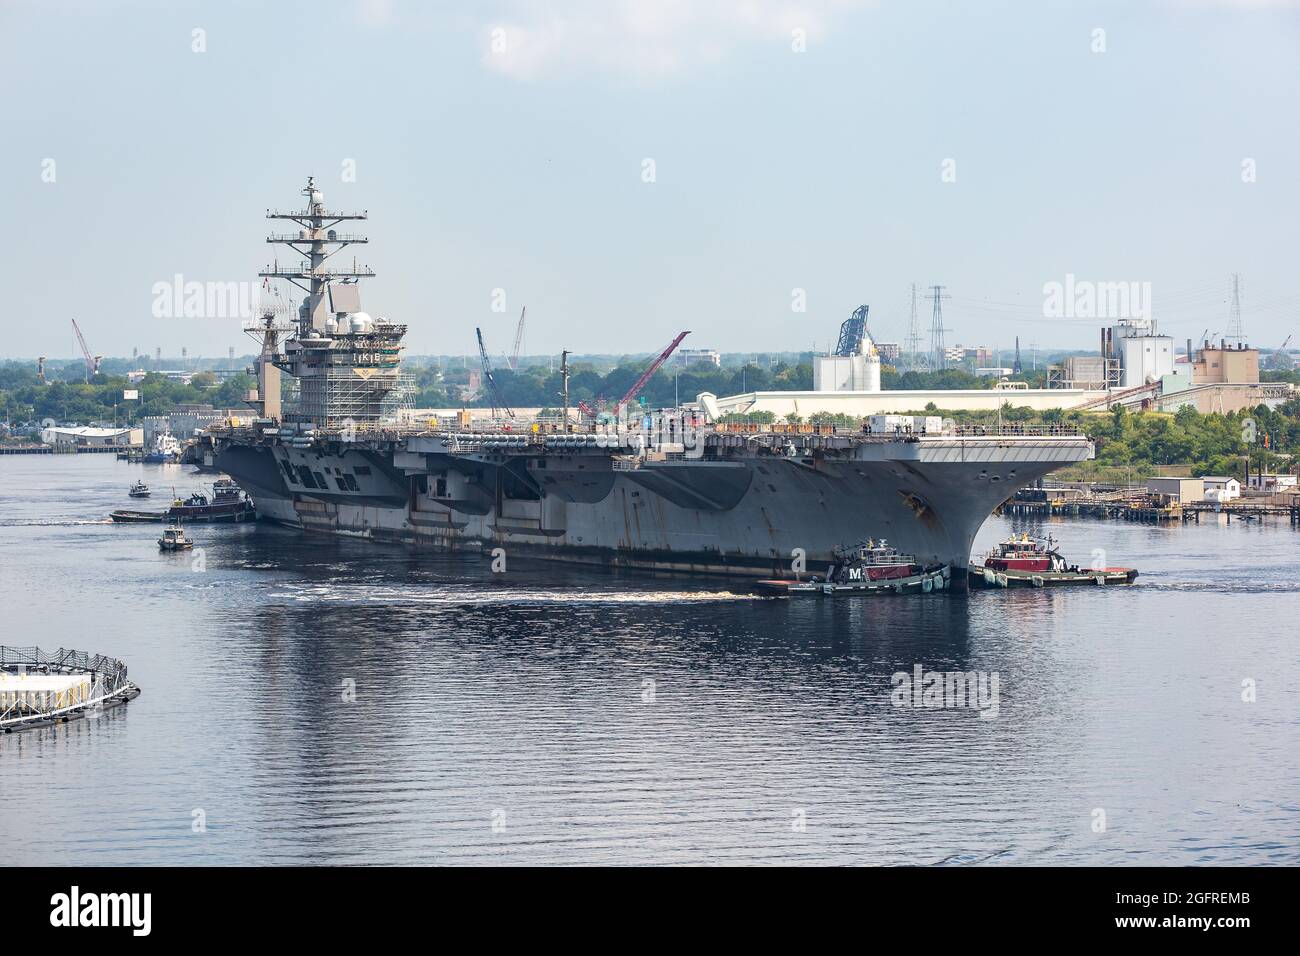 Norfolk Naval Shipyard (NNSY) welcomed USS Dwight D. Eisenhower (CVN 69) Aug. 25 in advance of its 13-month Planned Incremental Availability (PIA). Stock Photo